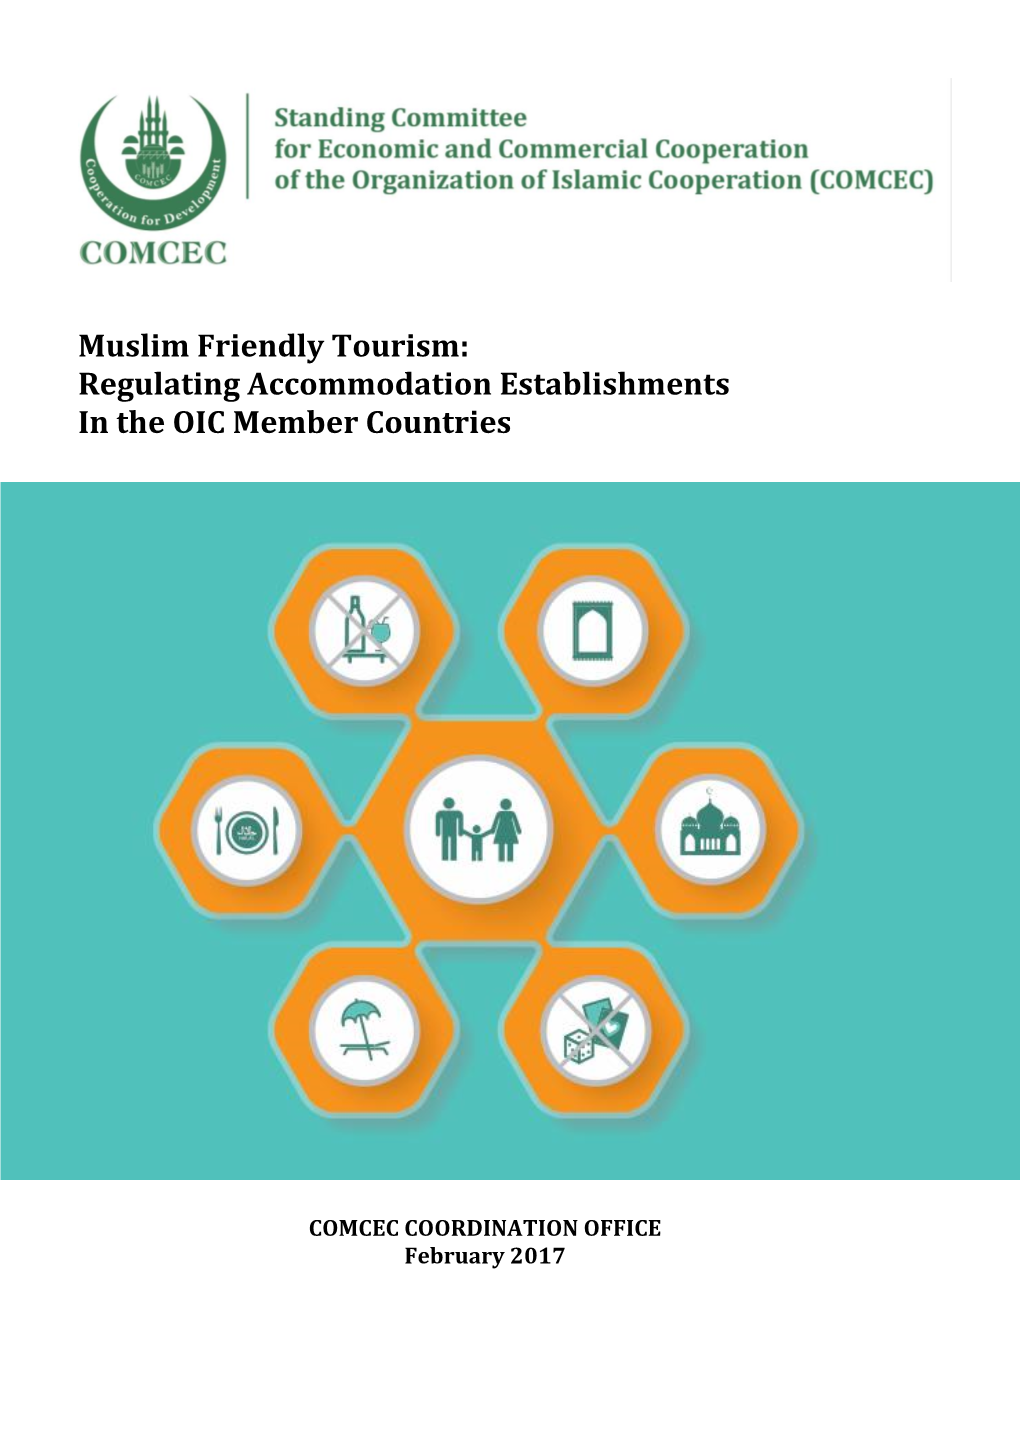 Muslim Friendly Tourism: Regulating Accommodation Establishments in the OIC Member Countries